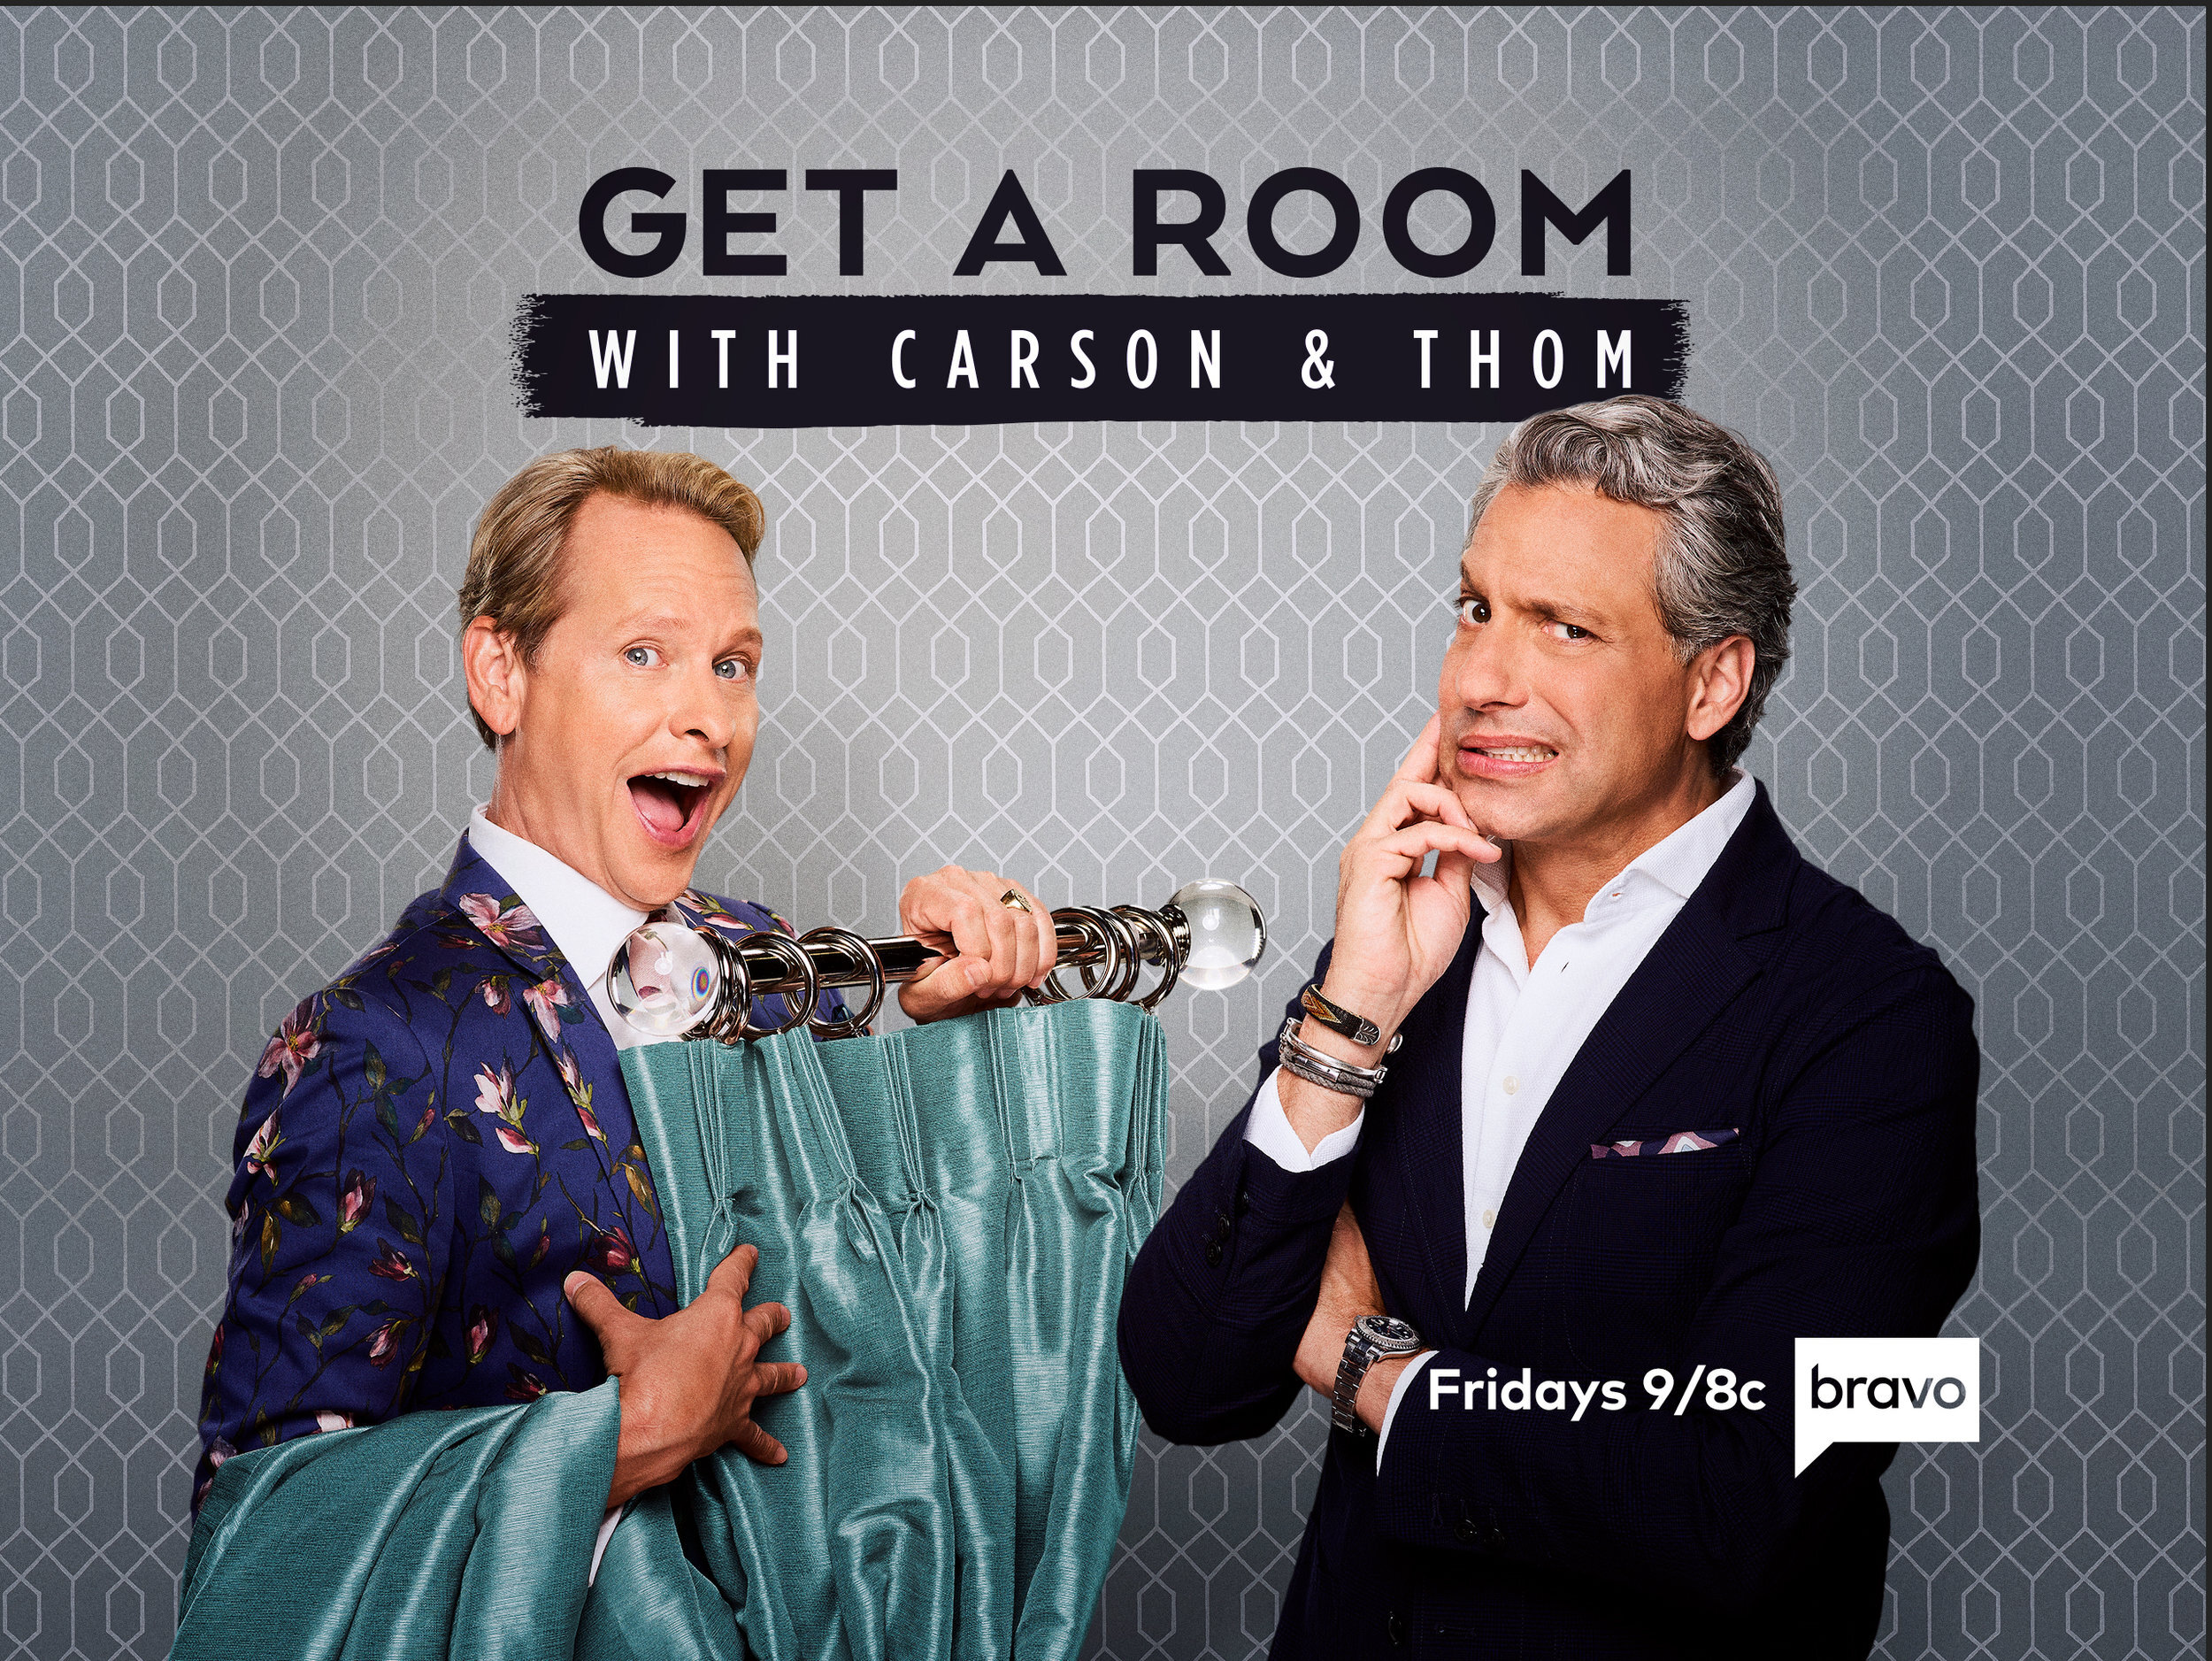 Get A Room with Carson & Thom